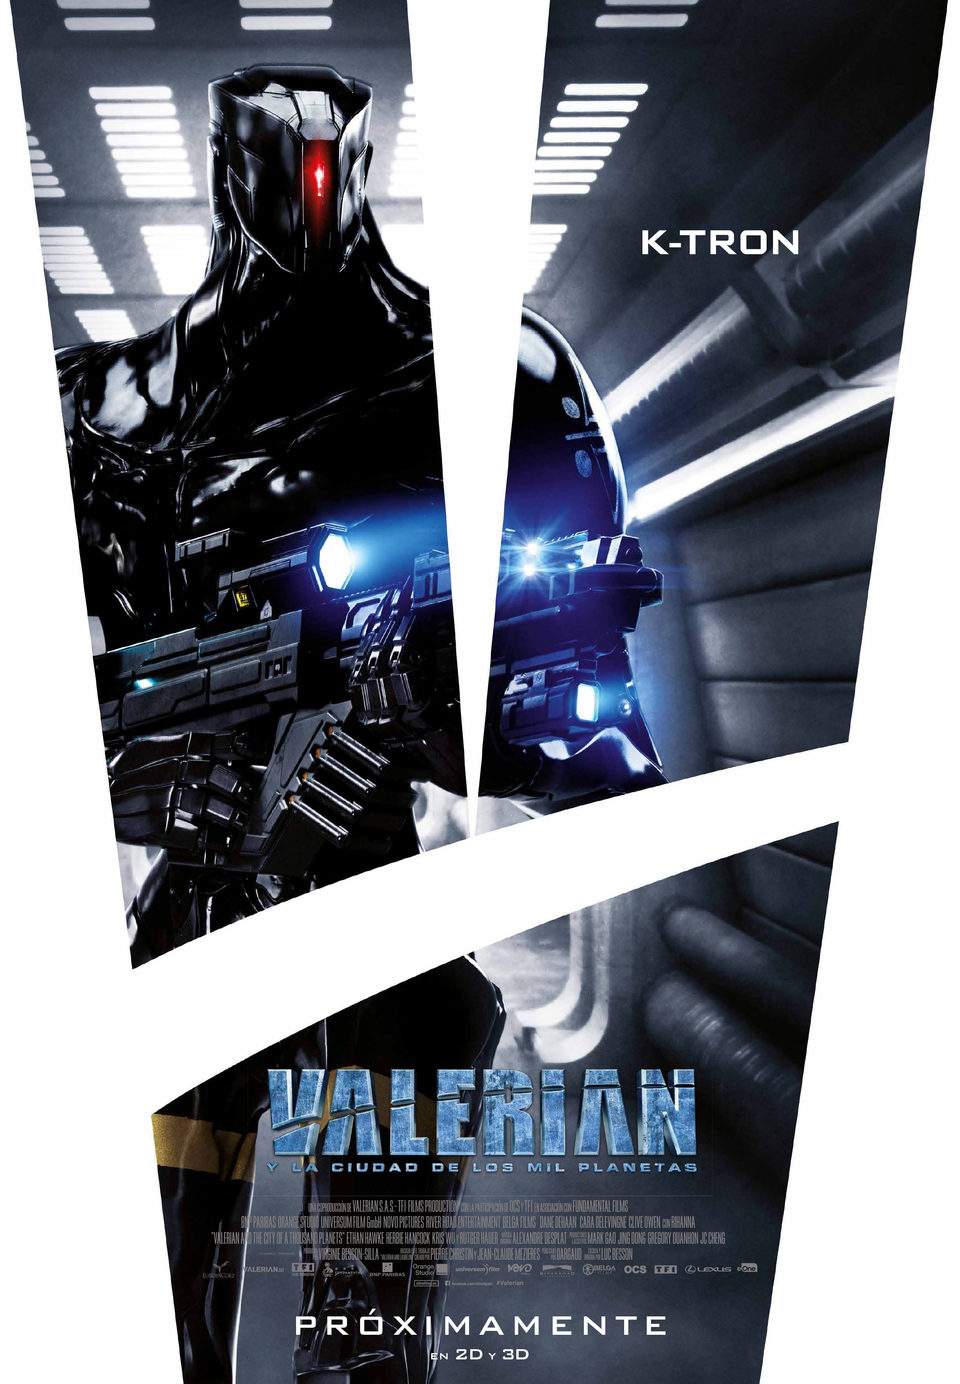 Poster of Valerian and the City of a Thousand Planets - K-Tron